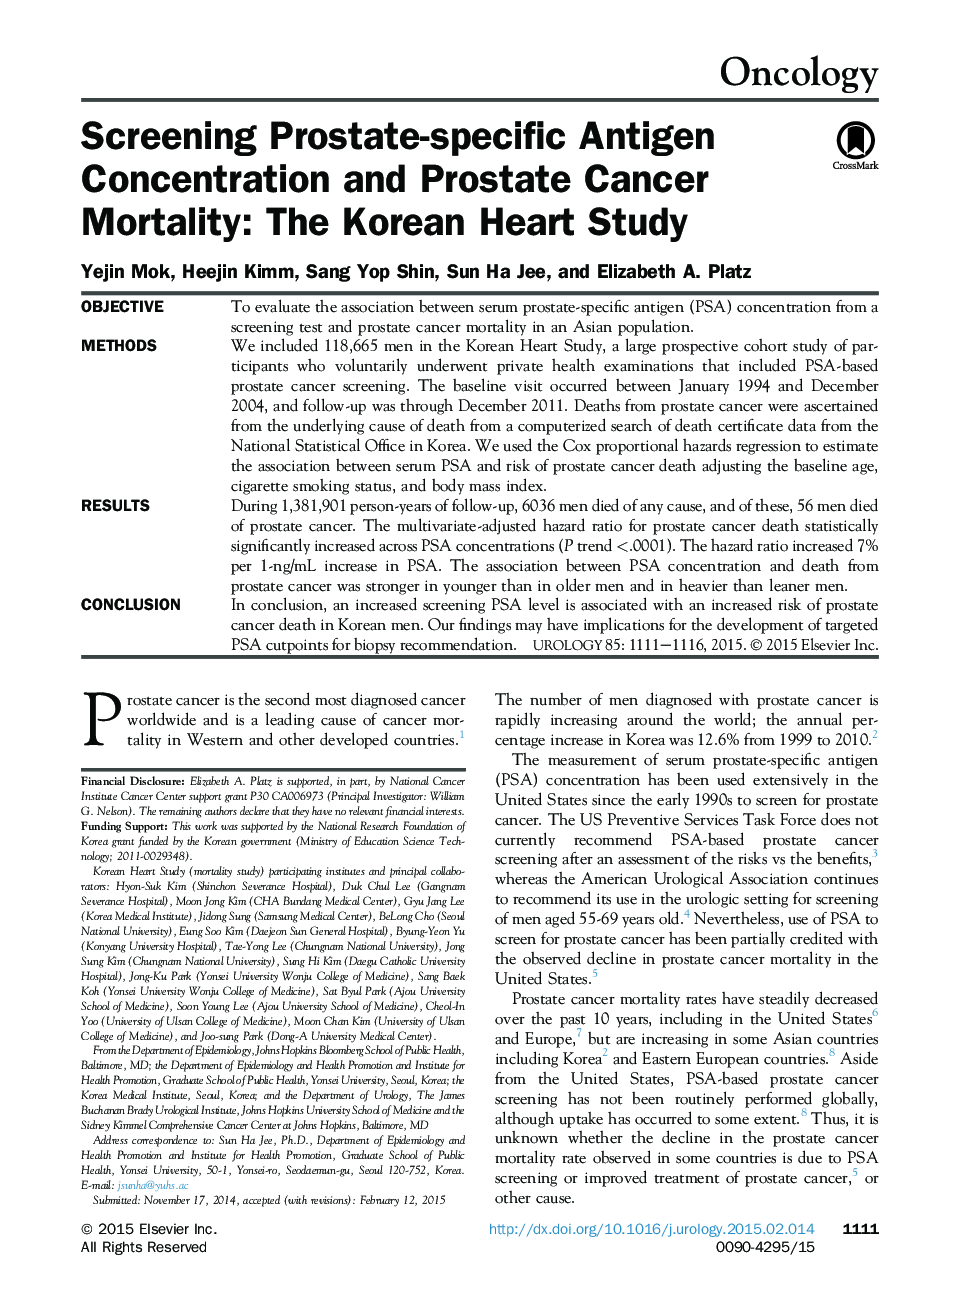 Screening Prostate-specific Antigen Concentration and Prostate Cancer Mortality: The Korean Heart Study 